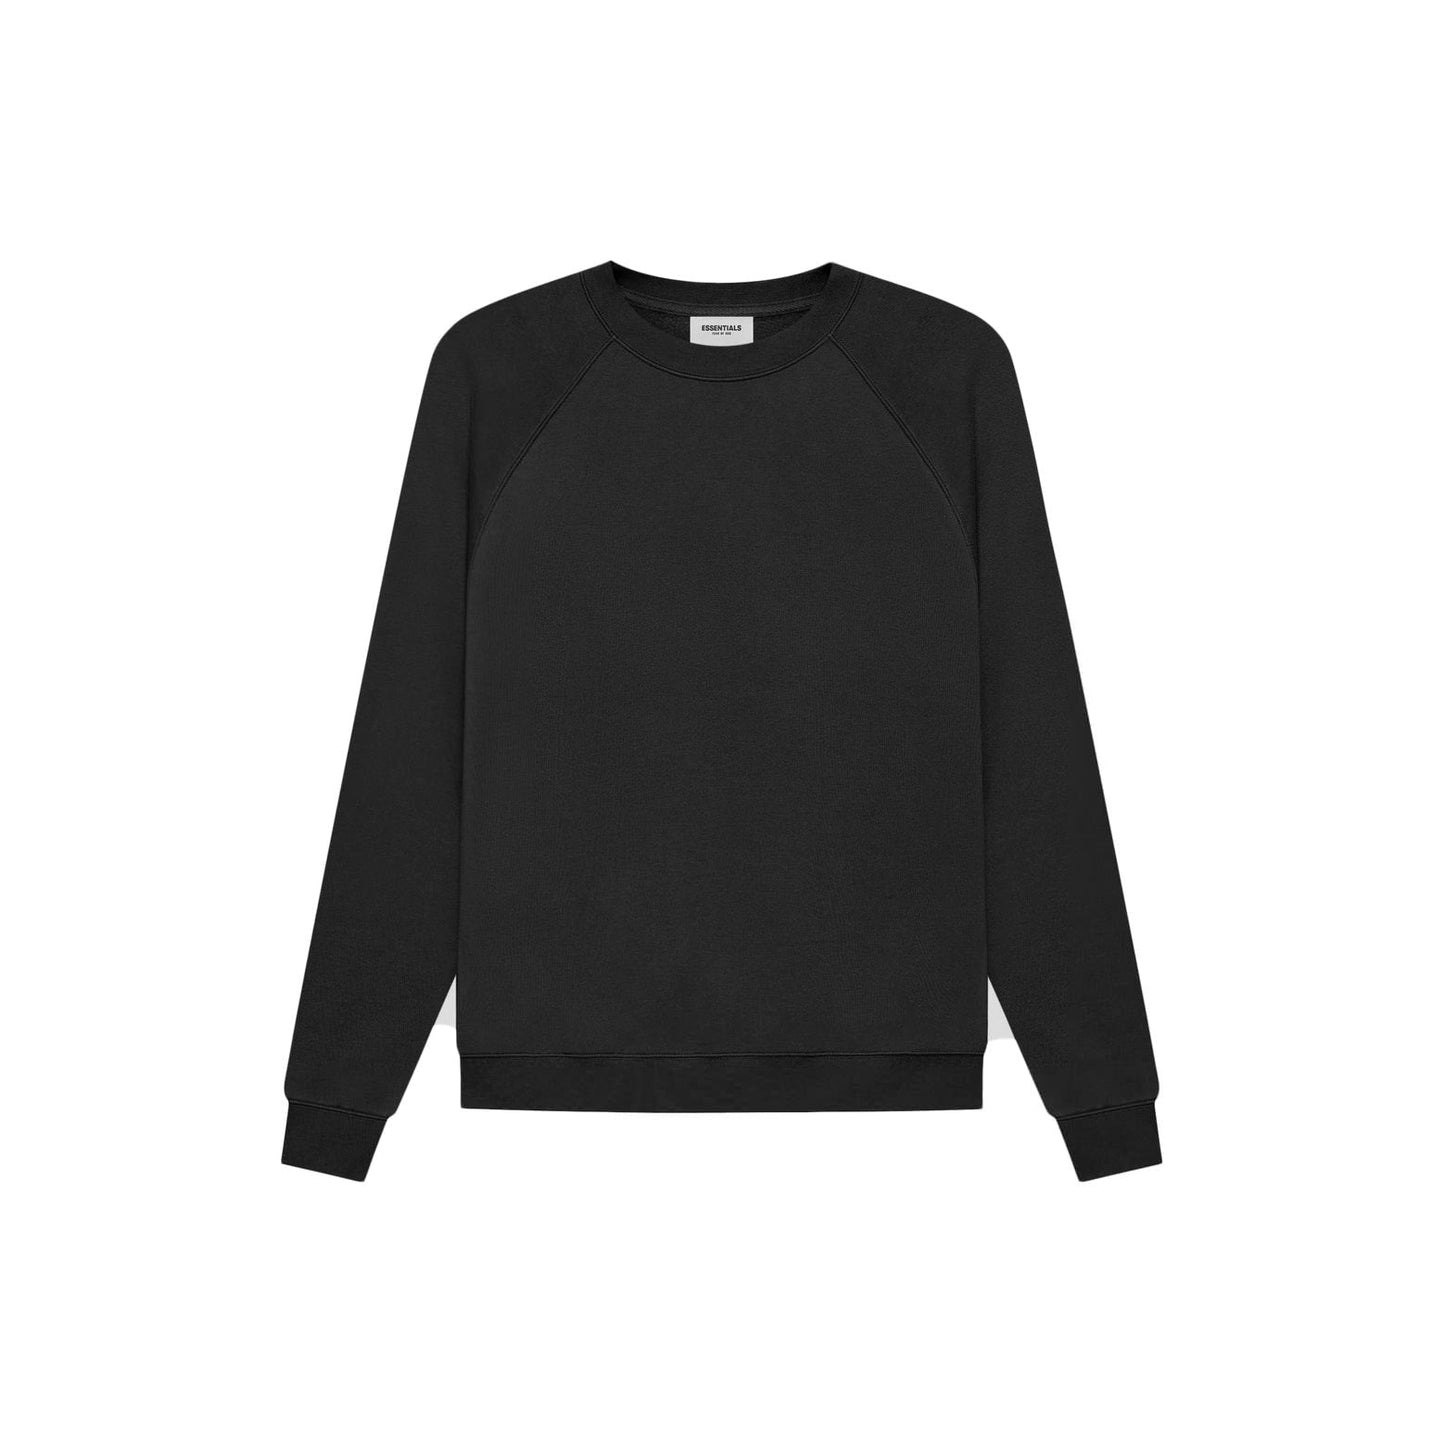 Fear of God Essentials Hoodie Pull-Over Crewneck (SS21) 'Moss/Goat'